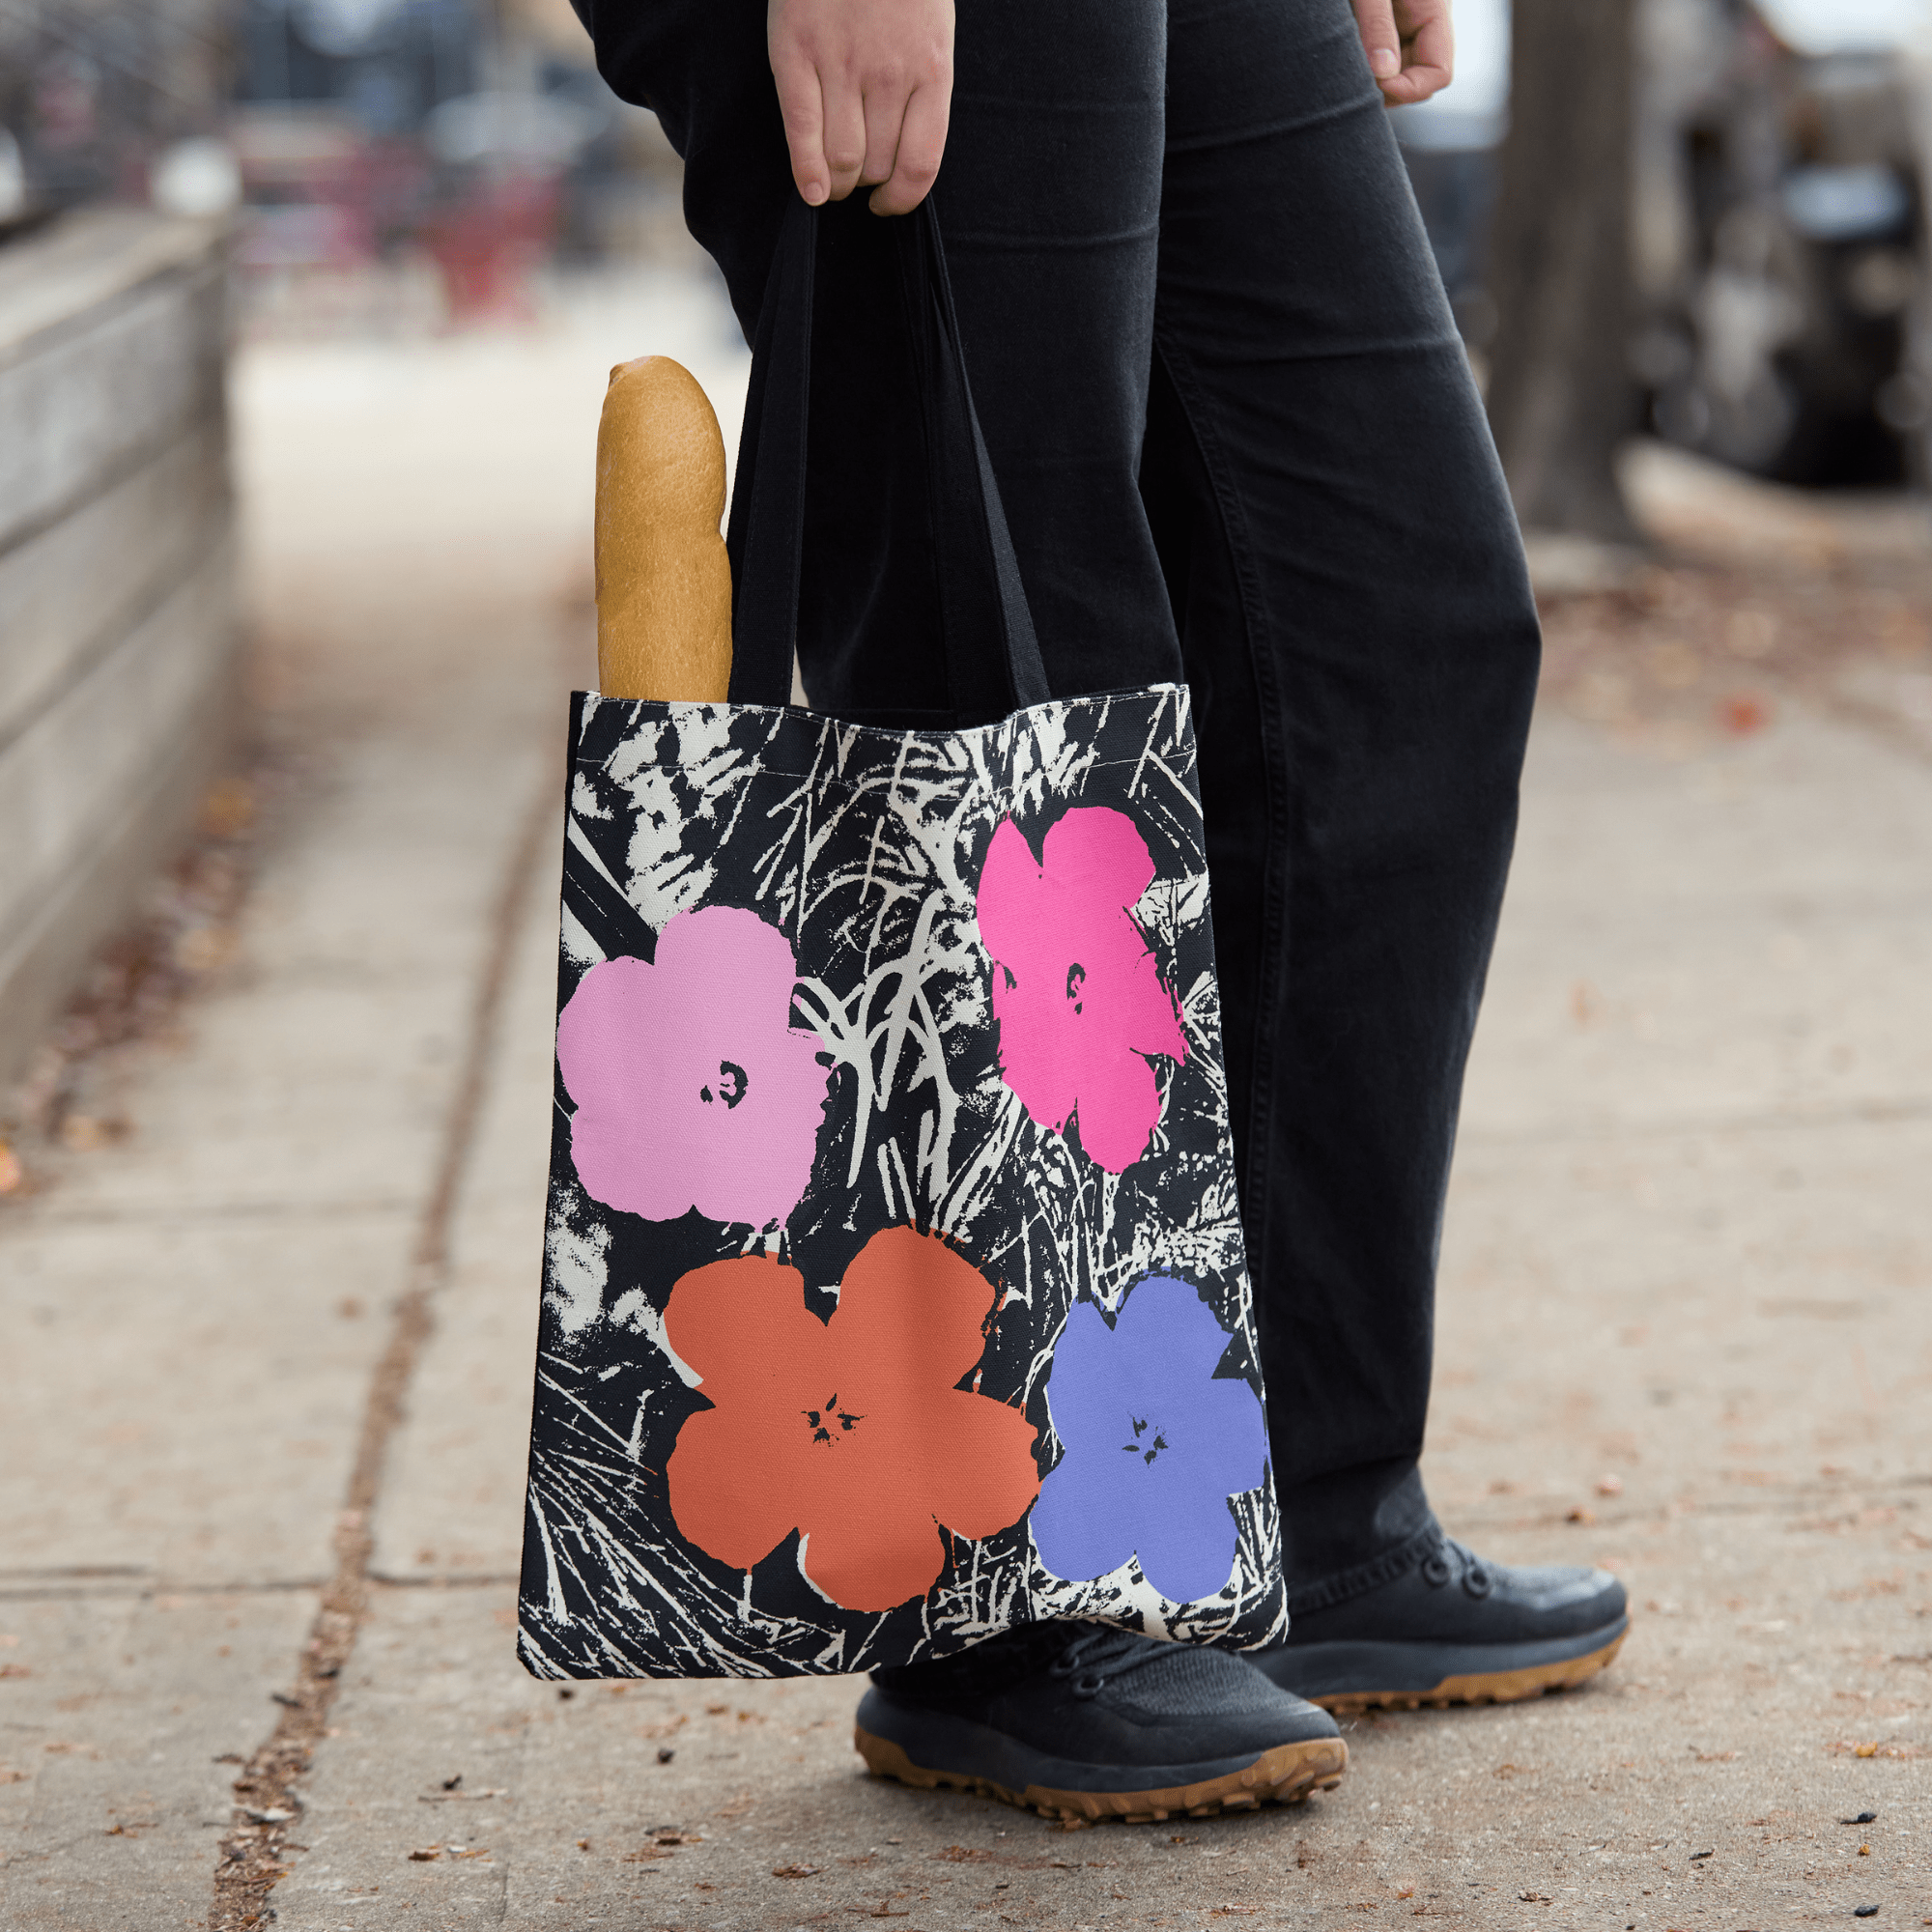 Eco-friendly Tote Bags for Branding | Pack of 10